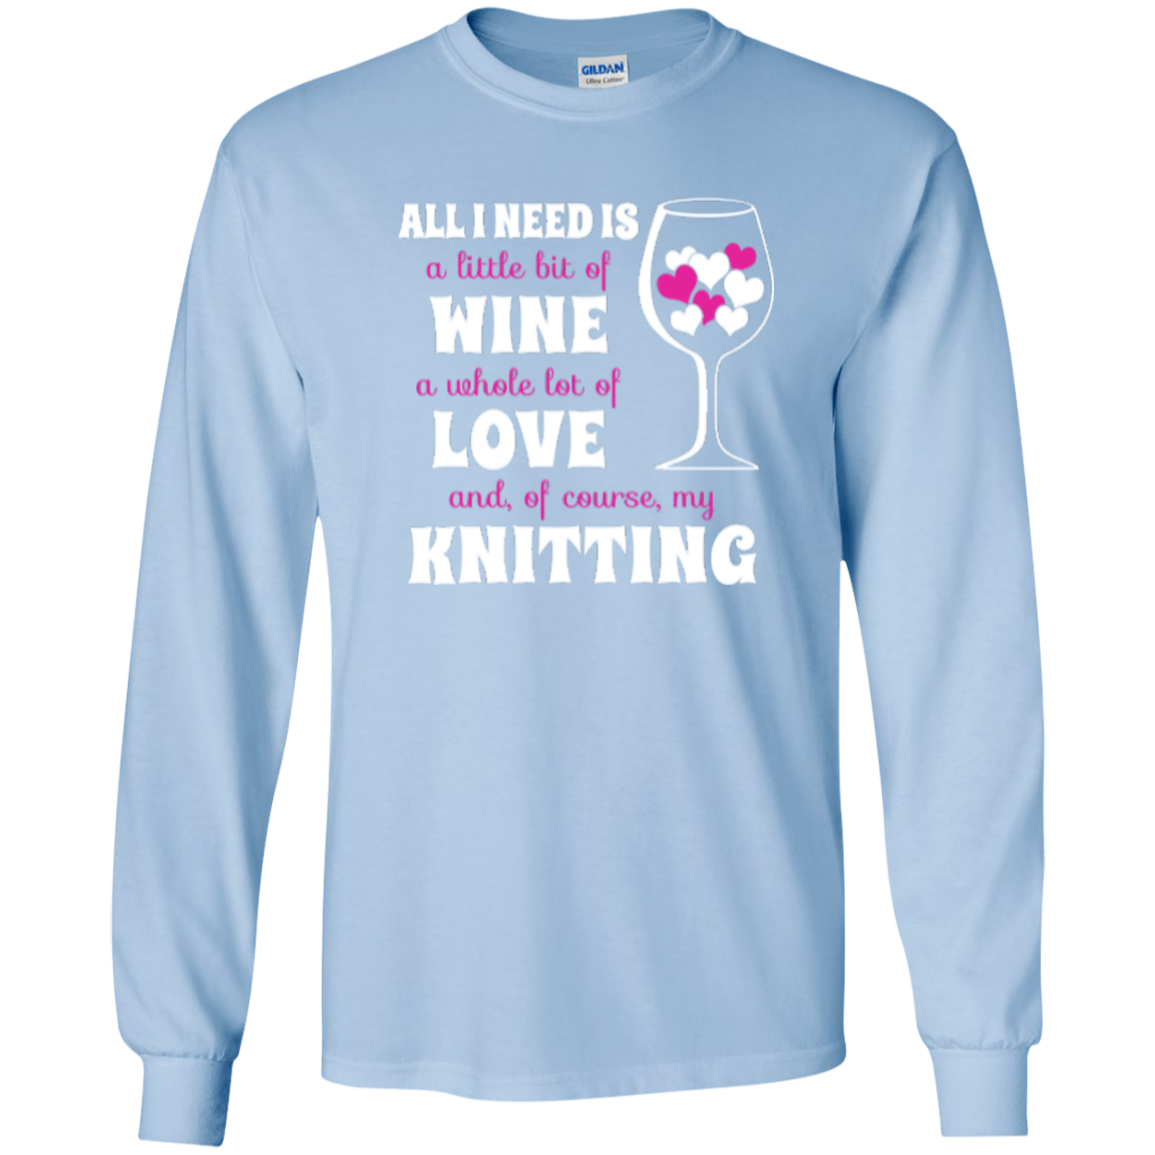 All I Need is Wine-Love-Knitting Long Sleeve Ultra Cotton Tshirt - Crafter4Life - 7